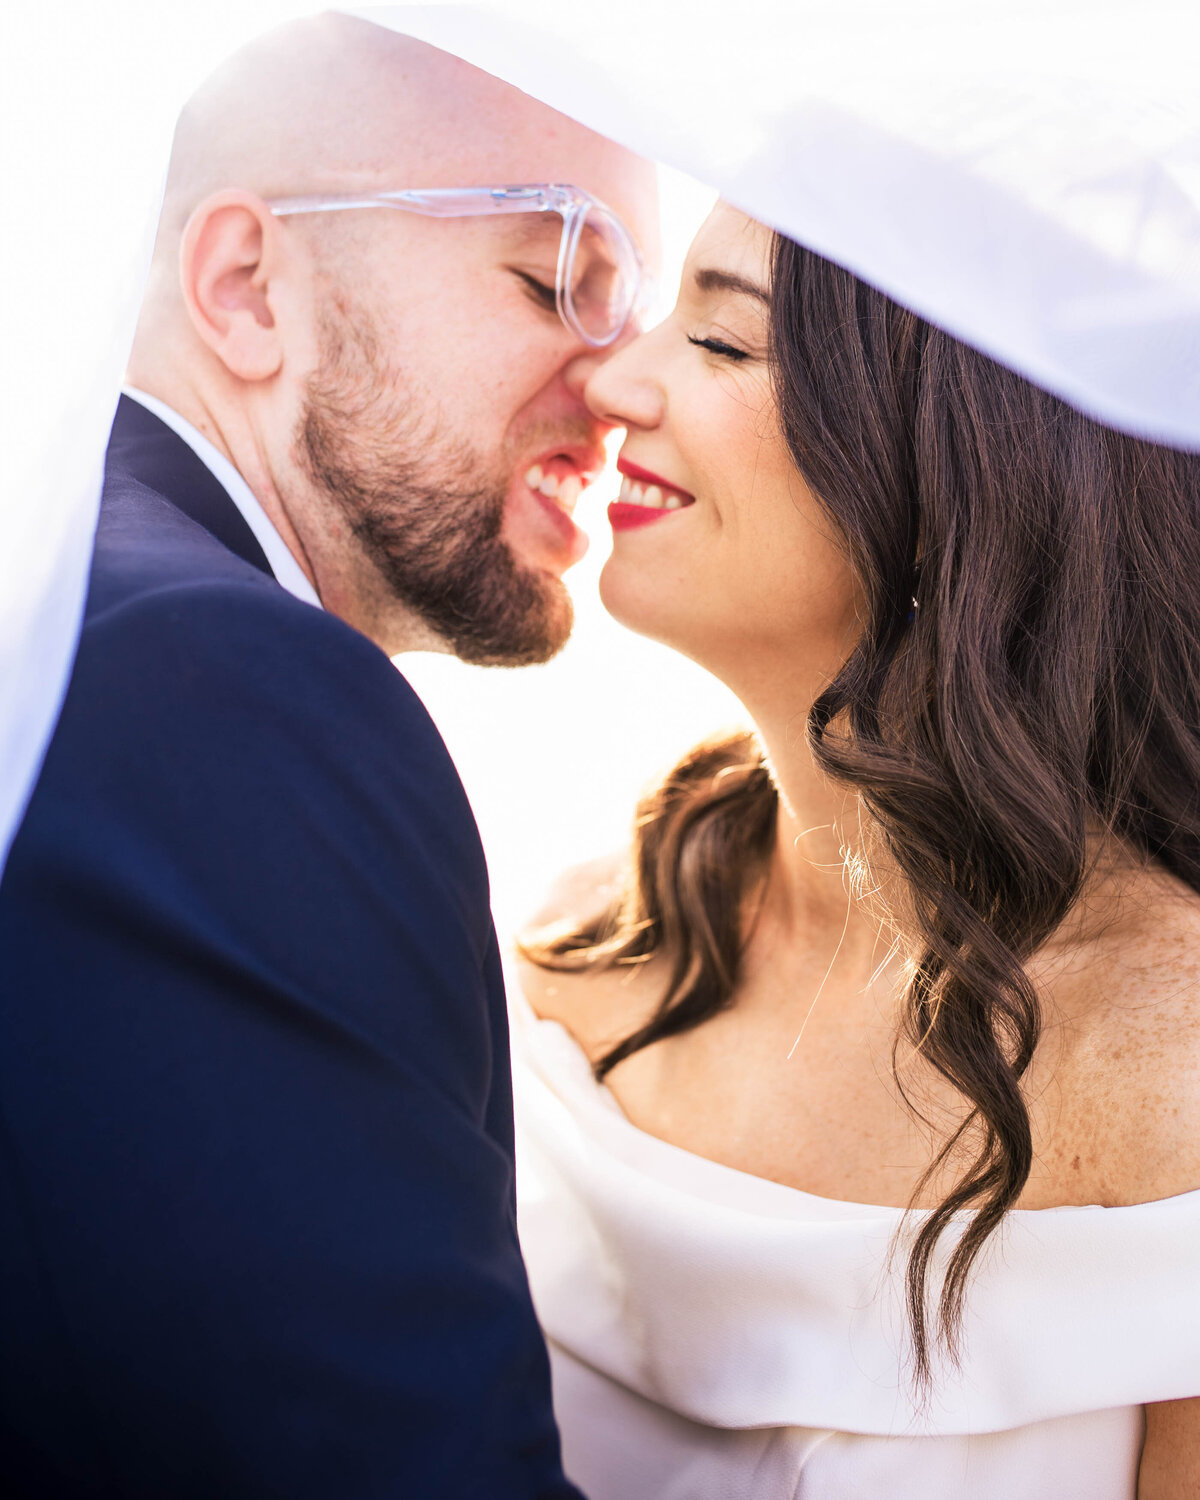 Upclose-photograph-of-bride-and-groom-smiling-just-before-a-kiss-underneath-her-veil